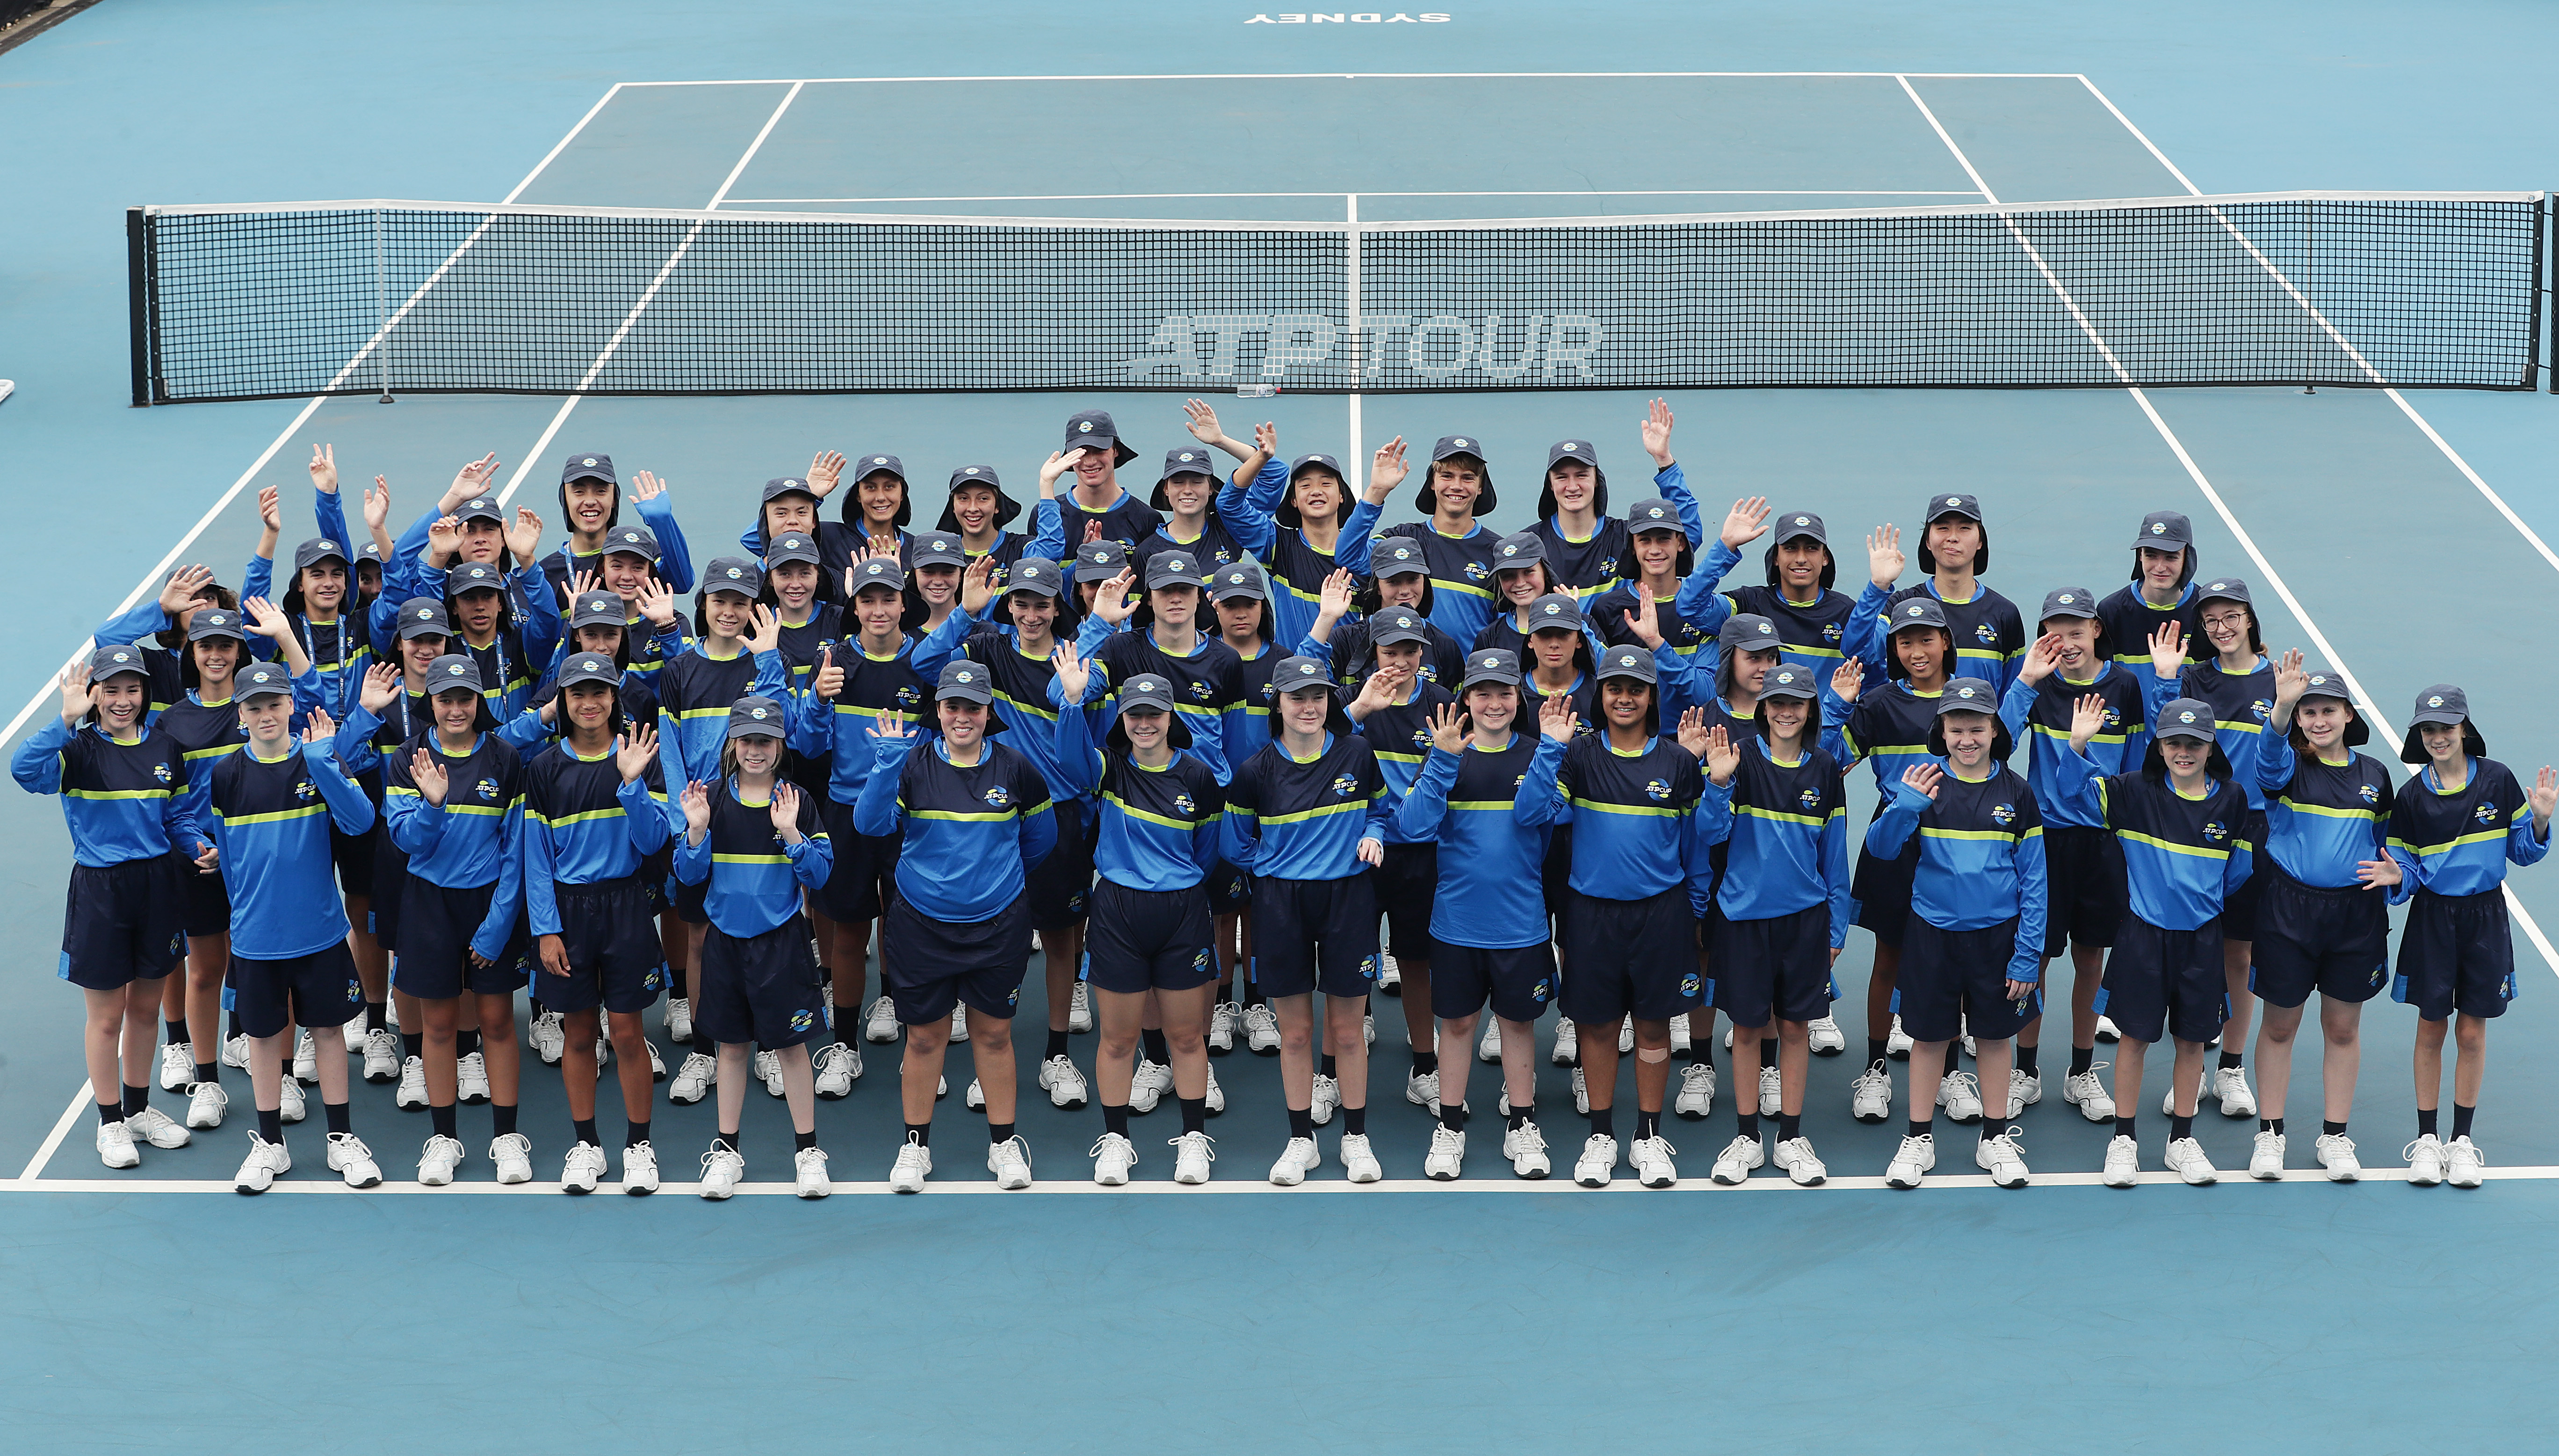 Sydney Tennis Classic and ATP Cup